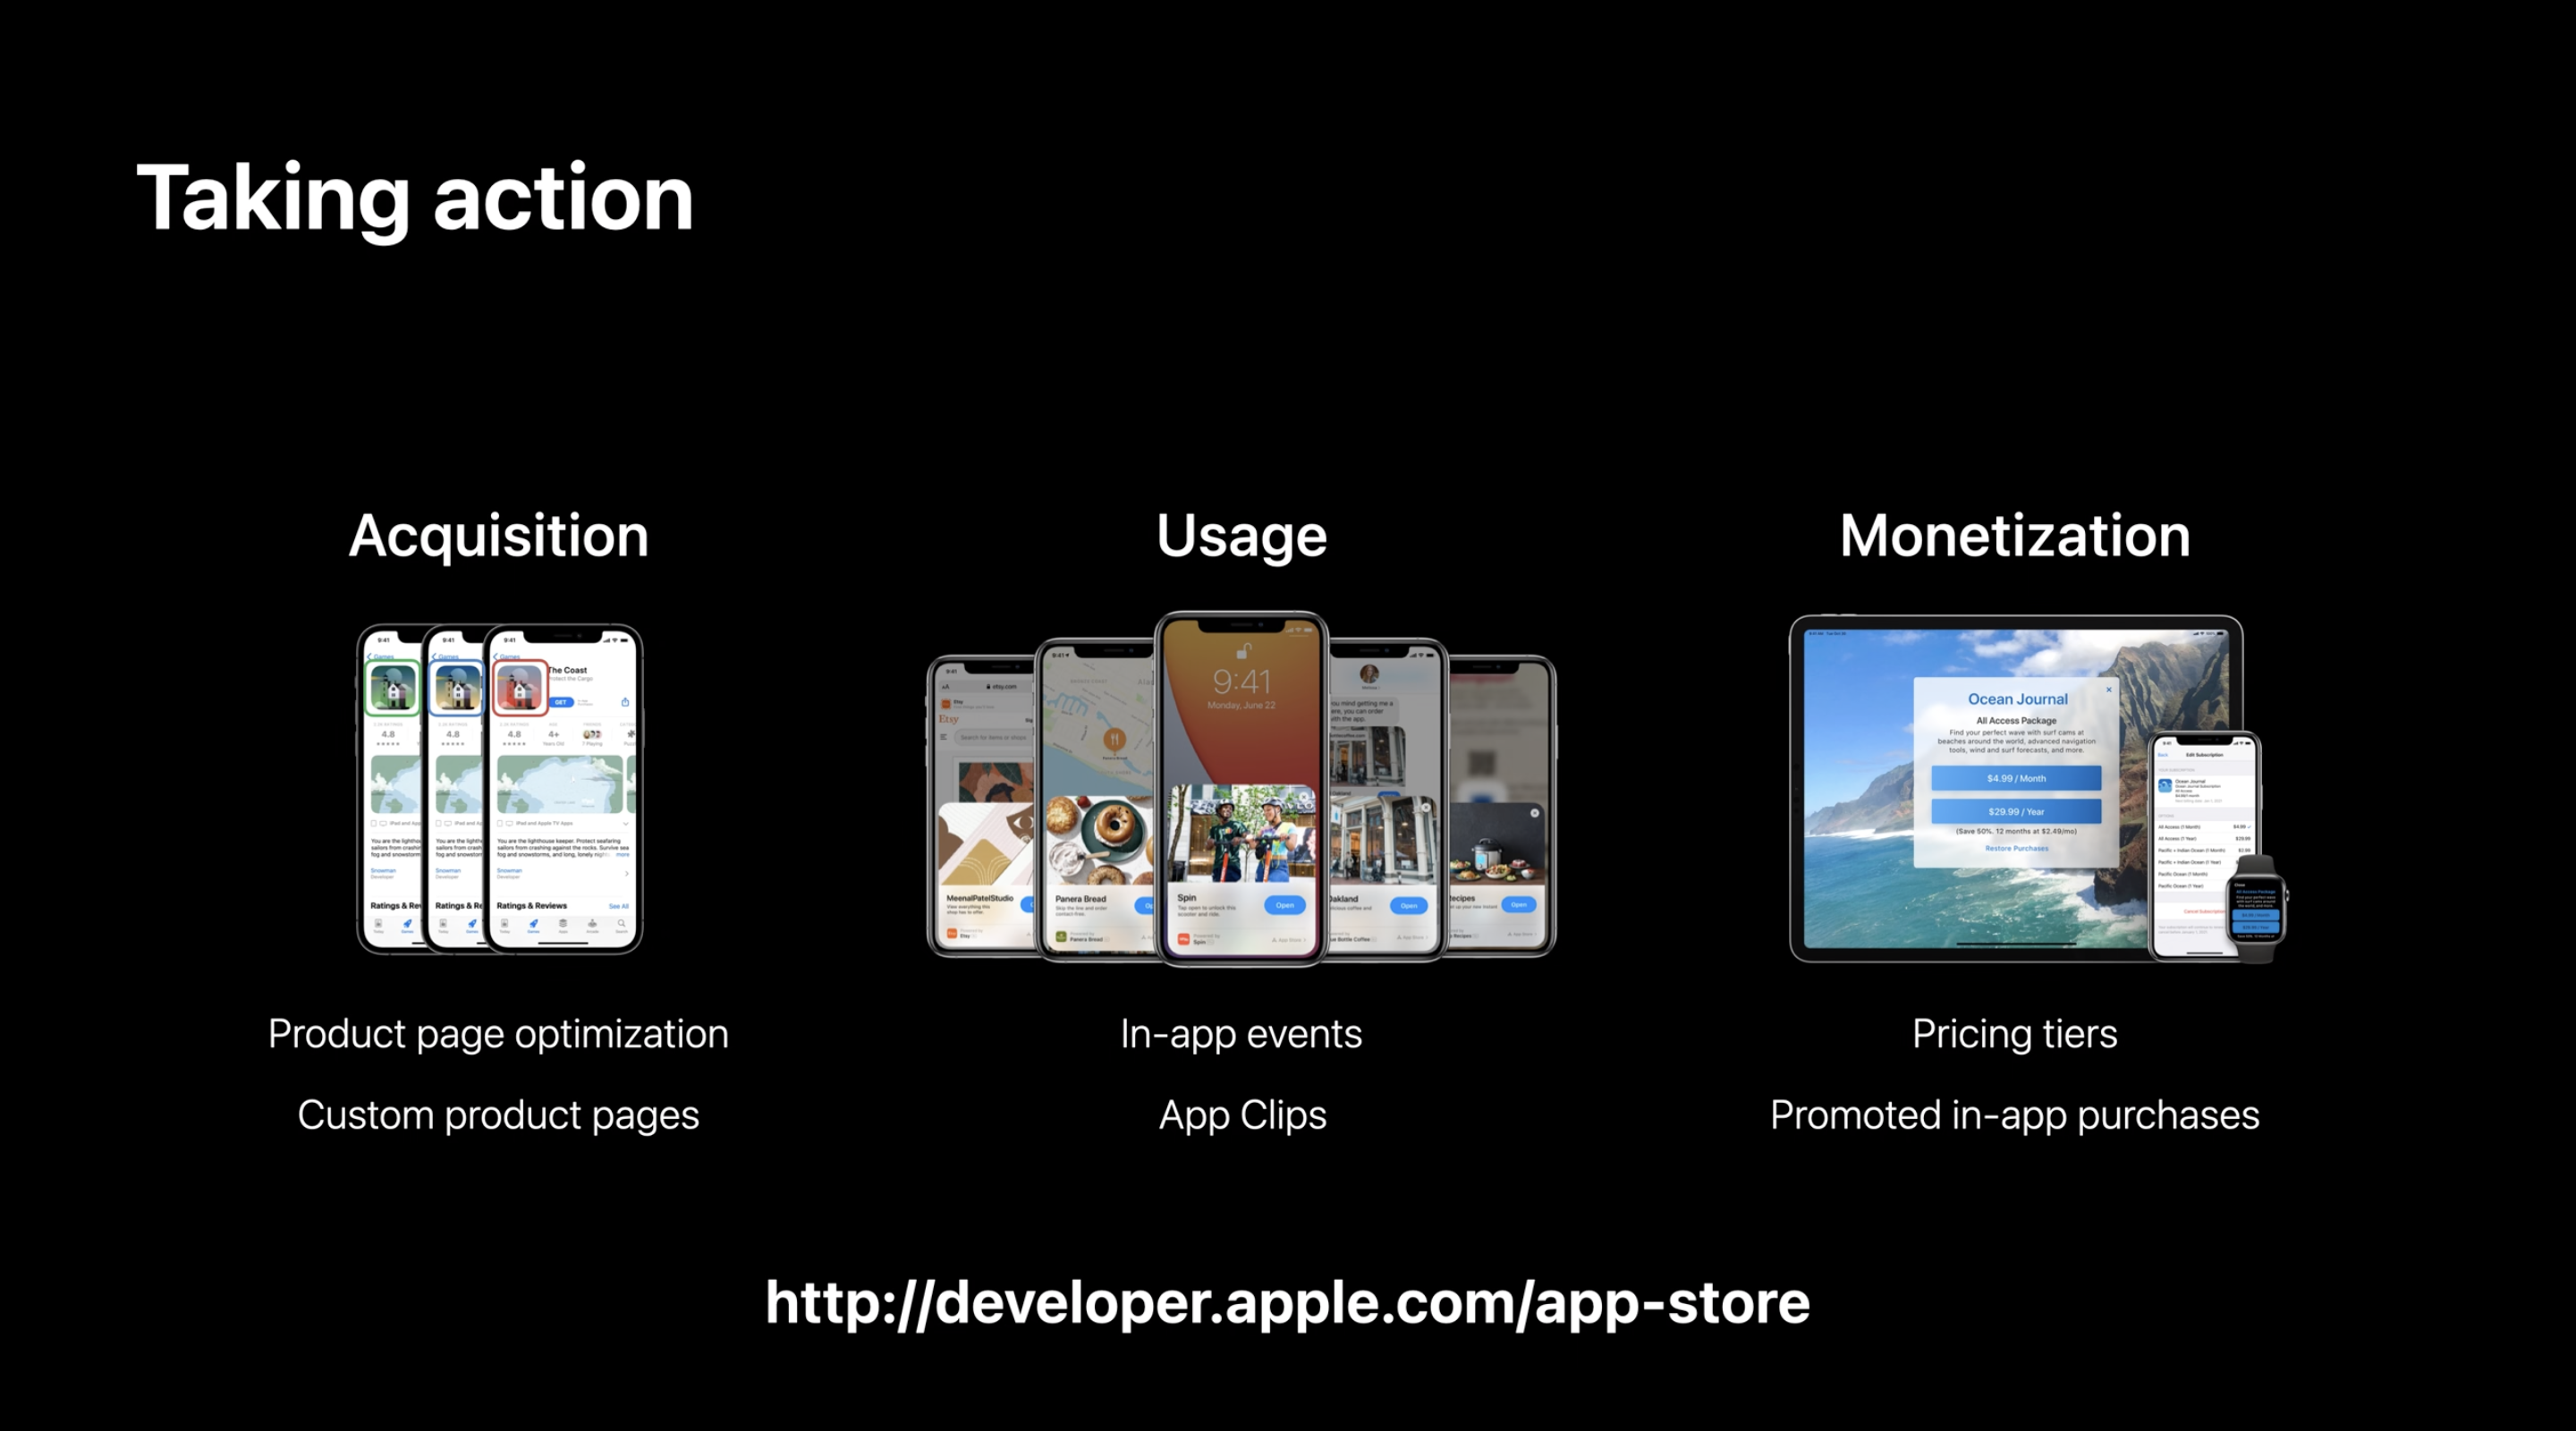 This is an image from Apple worldwide developers conference about iOS 16 features from the company